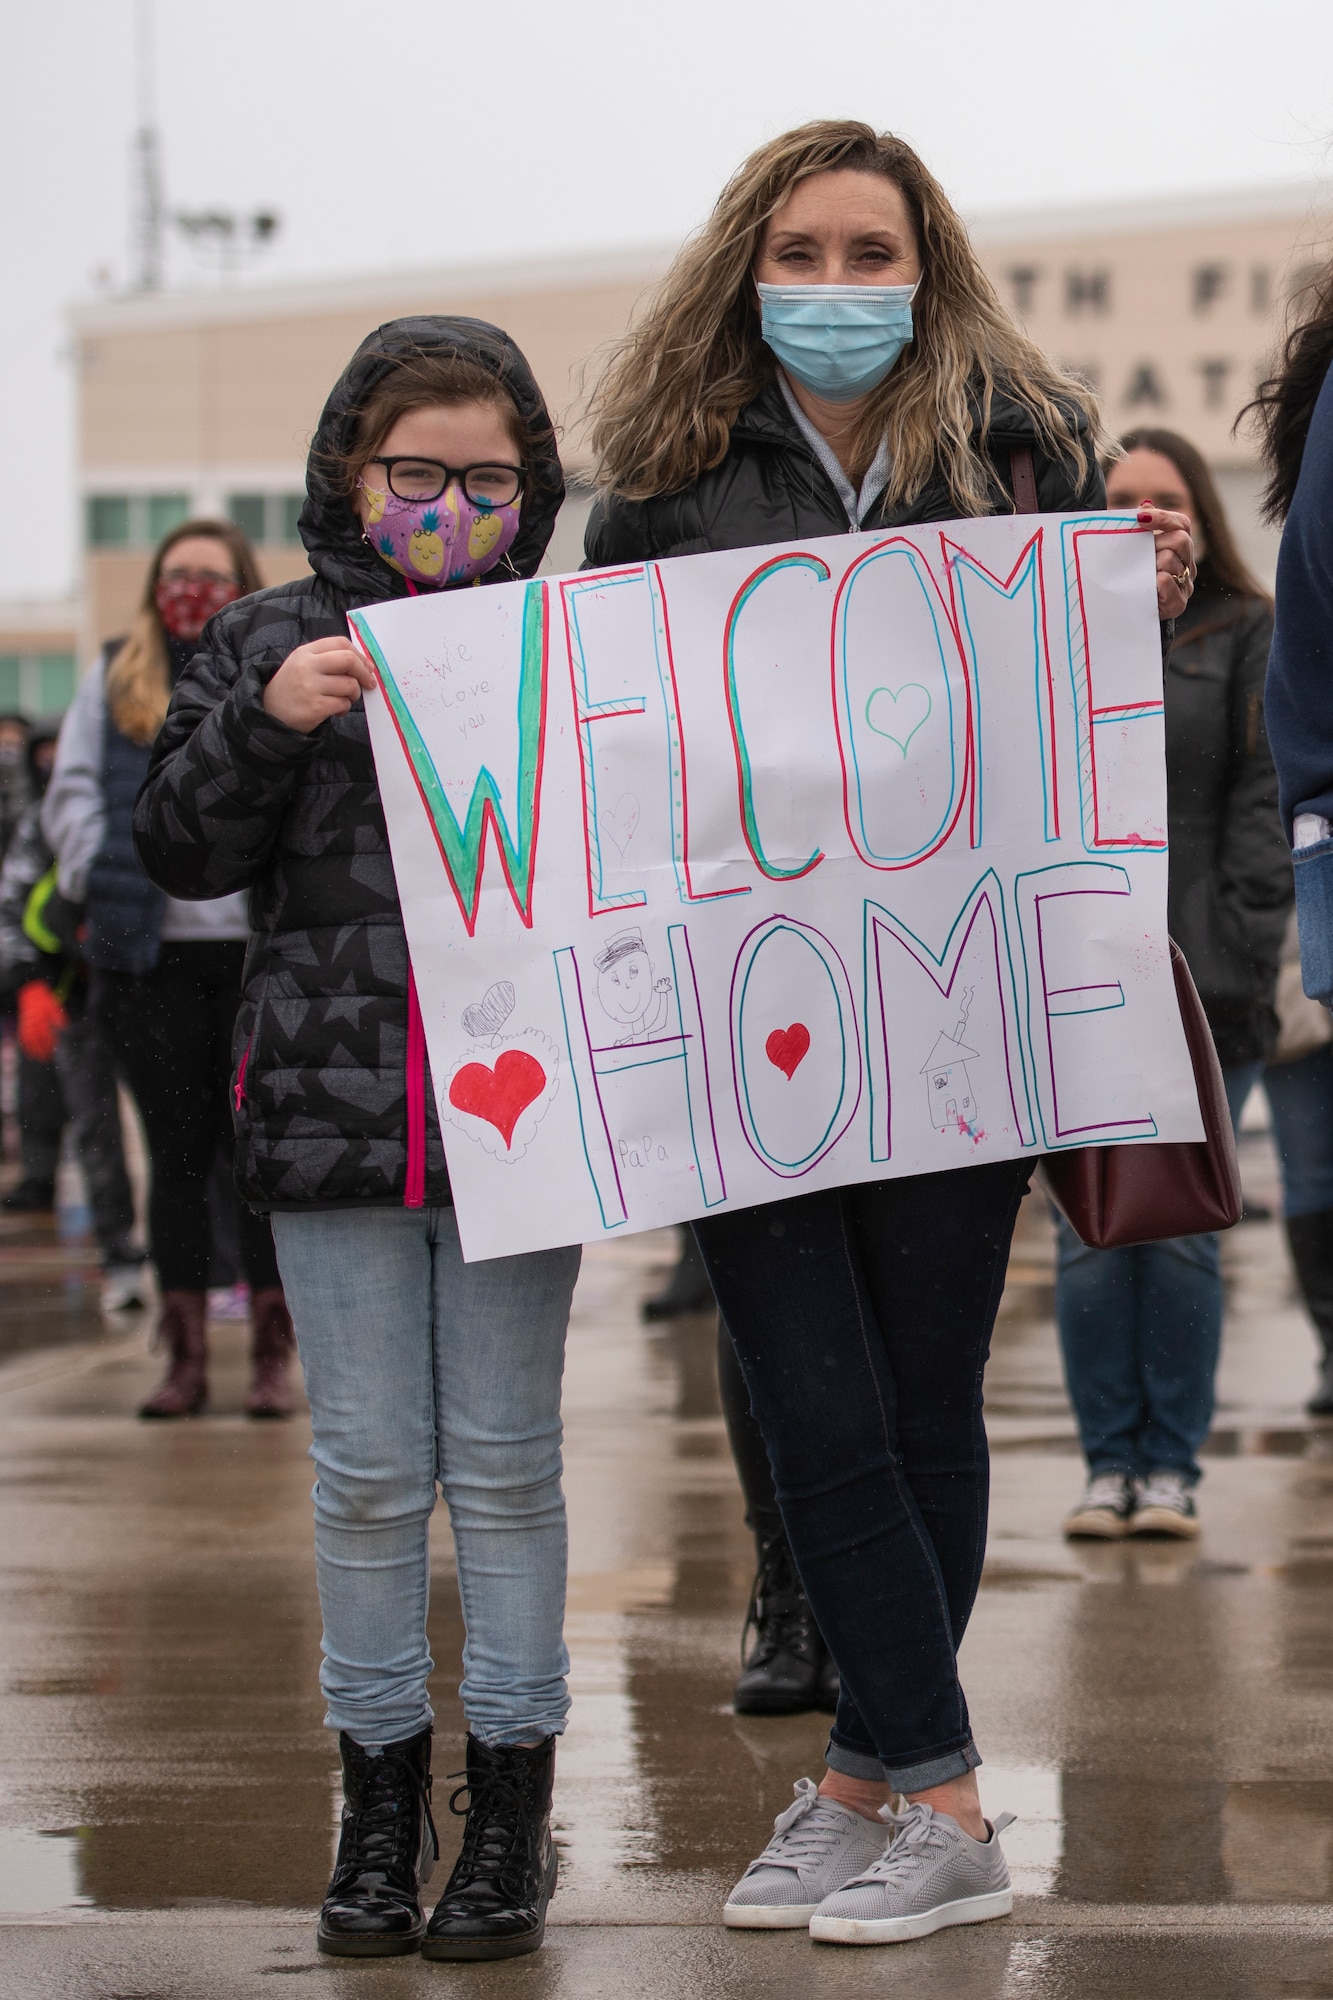 Family members await the return Airmen after an overseas deployment, Jan. 26, 2020 at the 180FW in Swanton, Ohio.